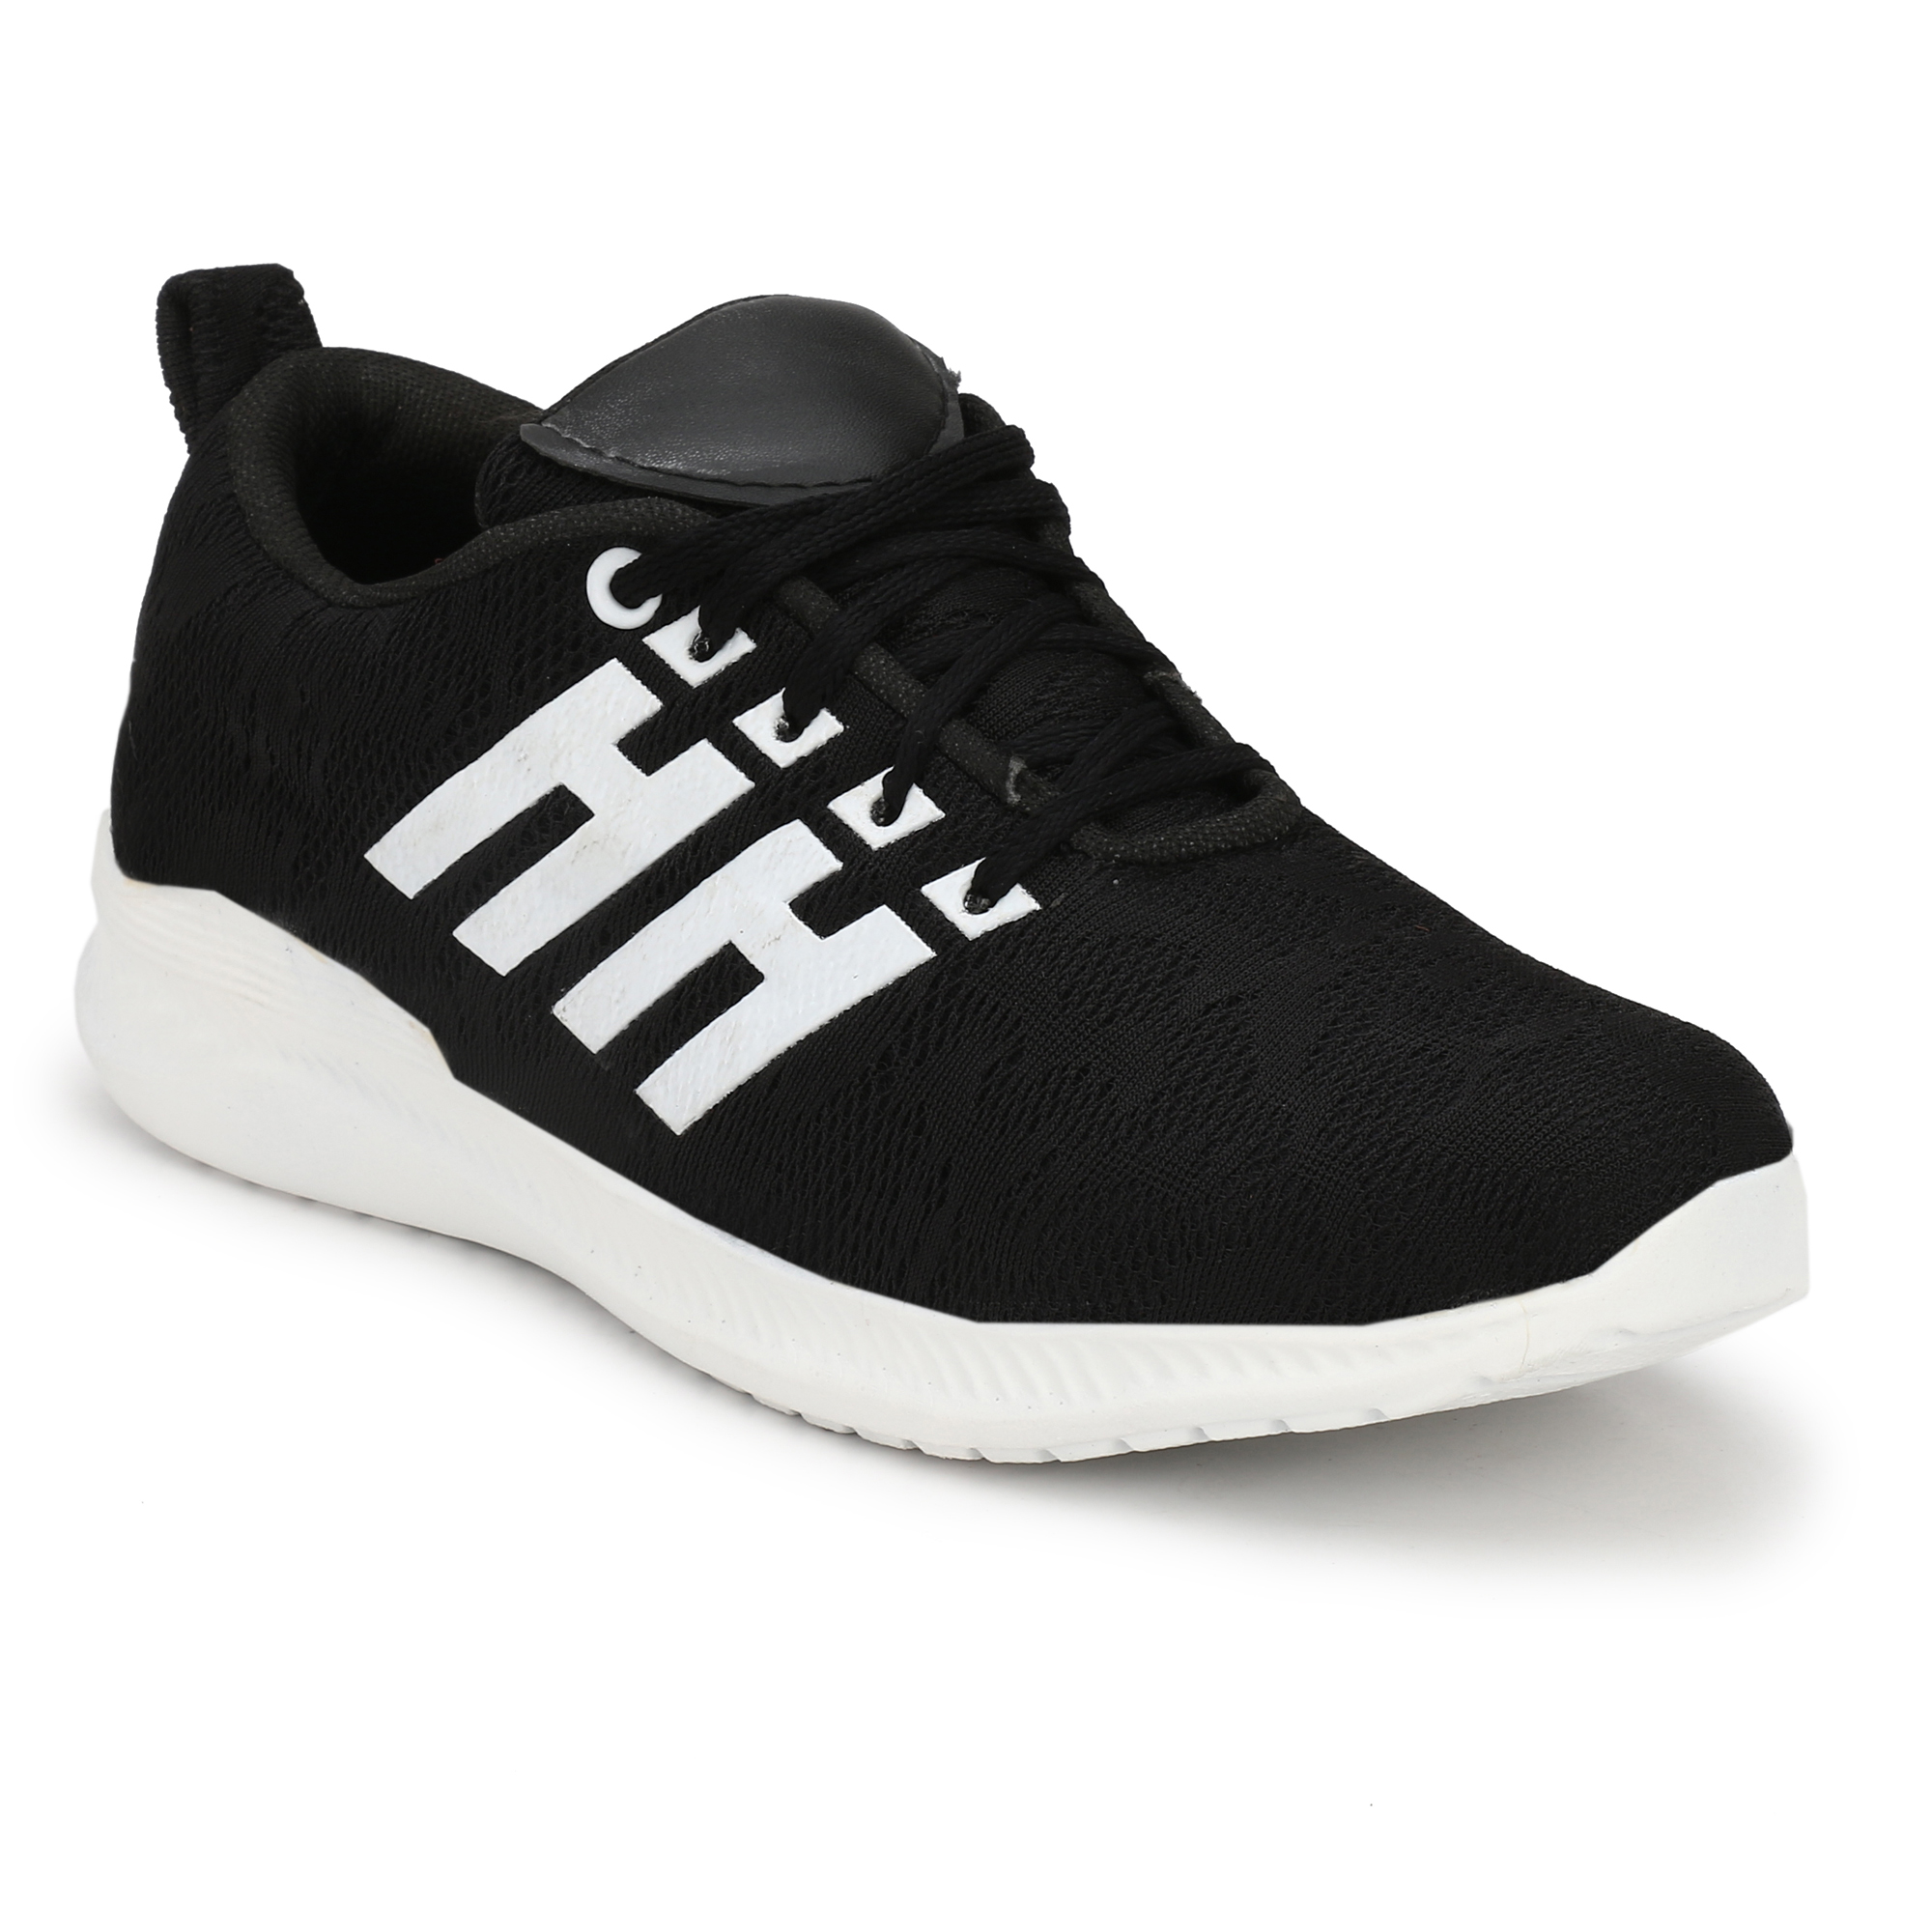 Buy 29K Black Stylish Sport Shoes For Men's Online @ ₹549 from ShopClues